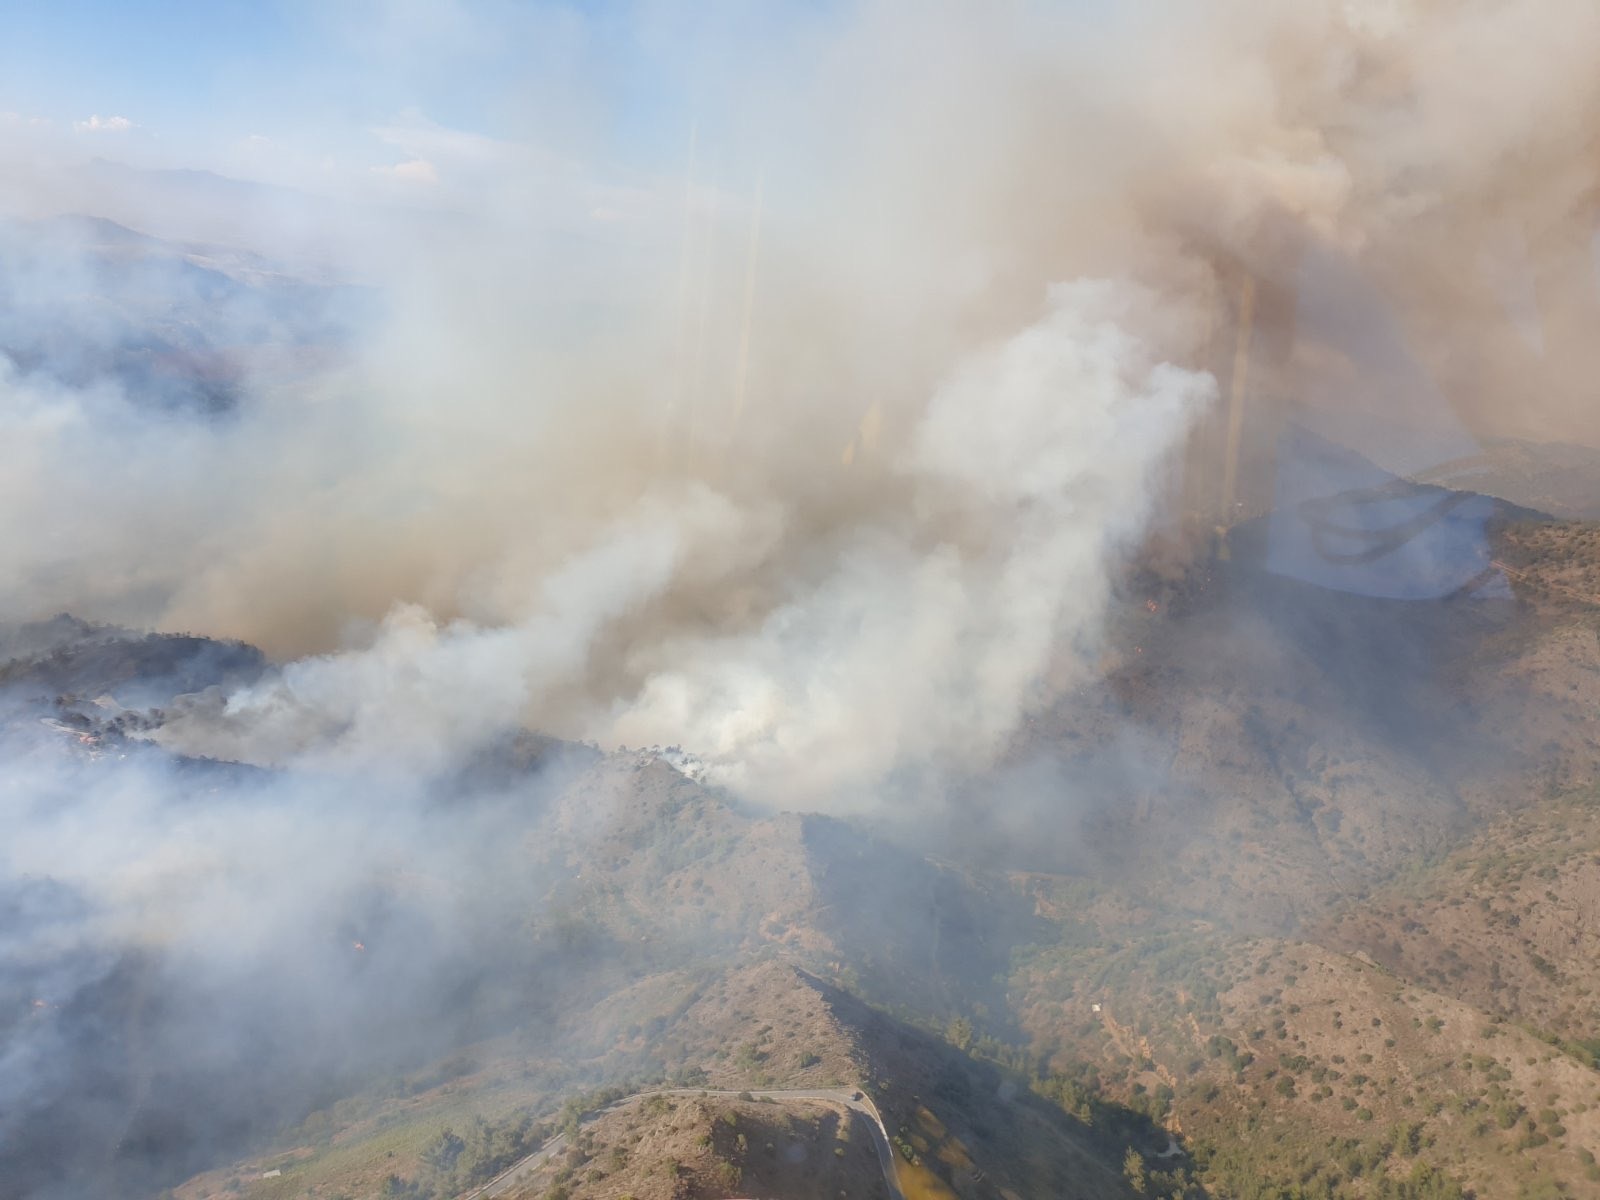 Farmakas fire contained, risk of flare-ups still present